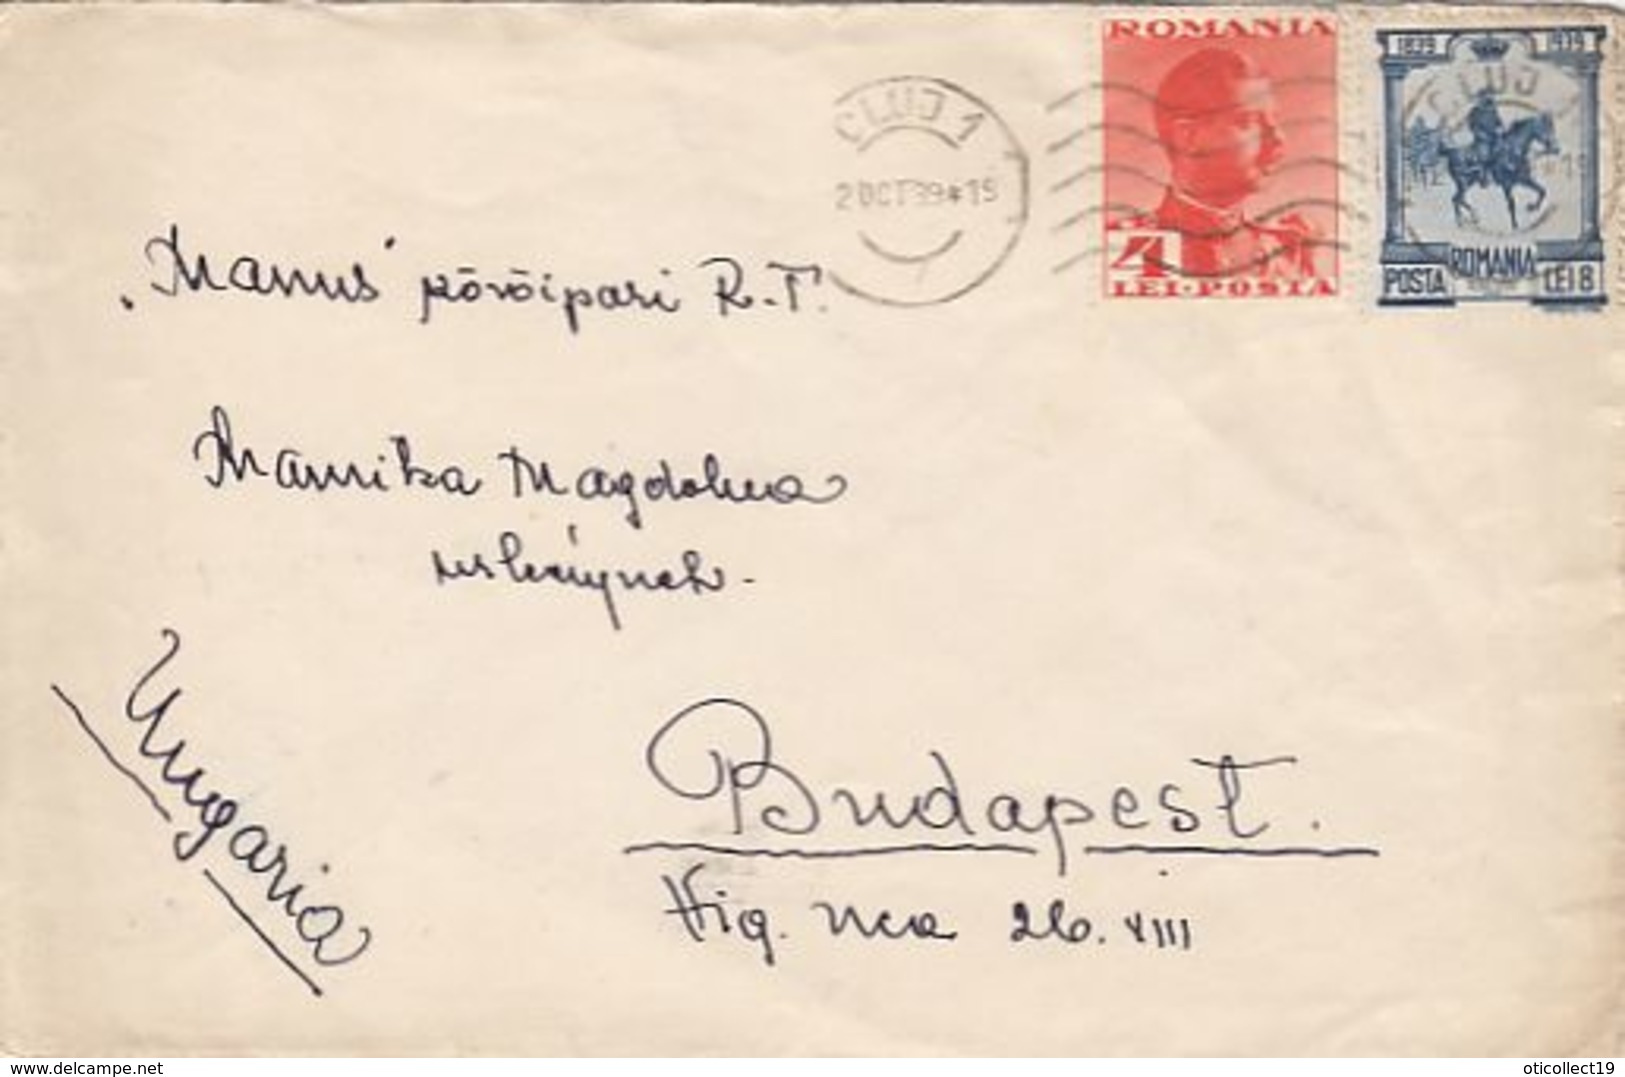 KING CHARLES 2ND, KING CHARLES 1ST, STAMPS ON COVER, 1939, ROMANIA - Brieven En Documenten